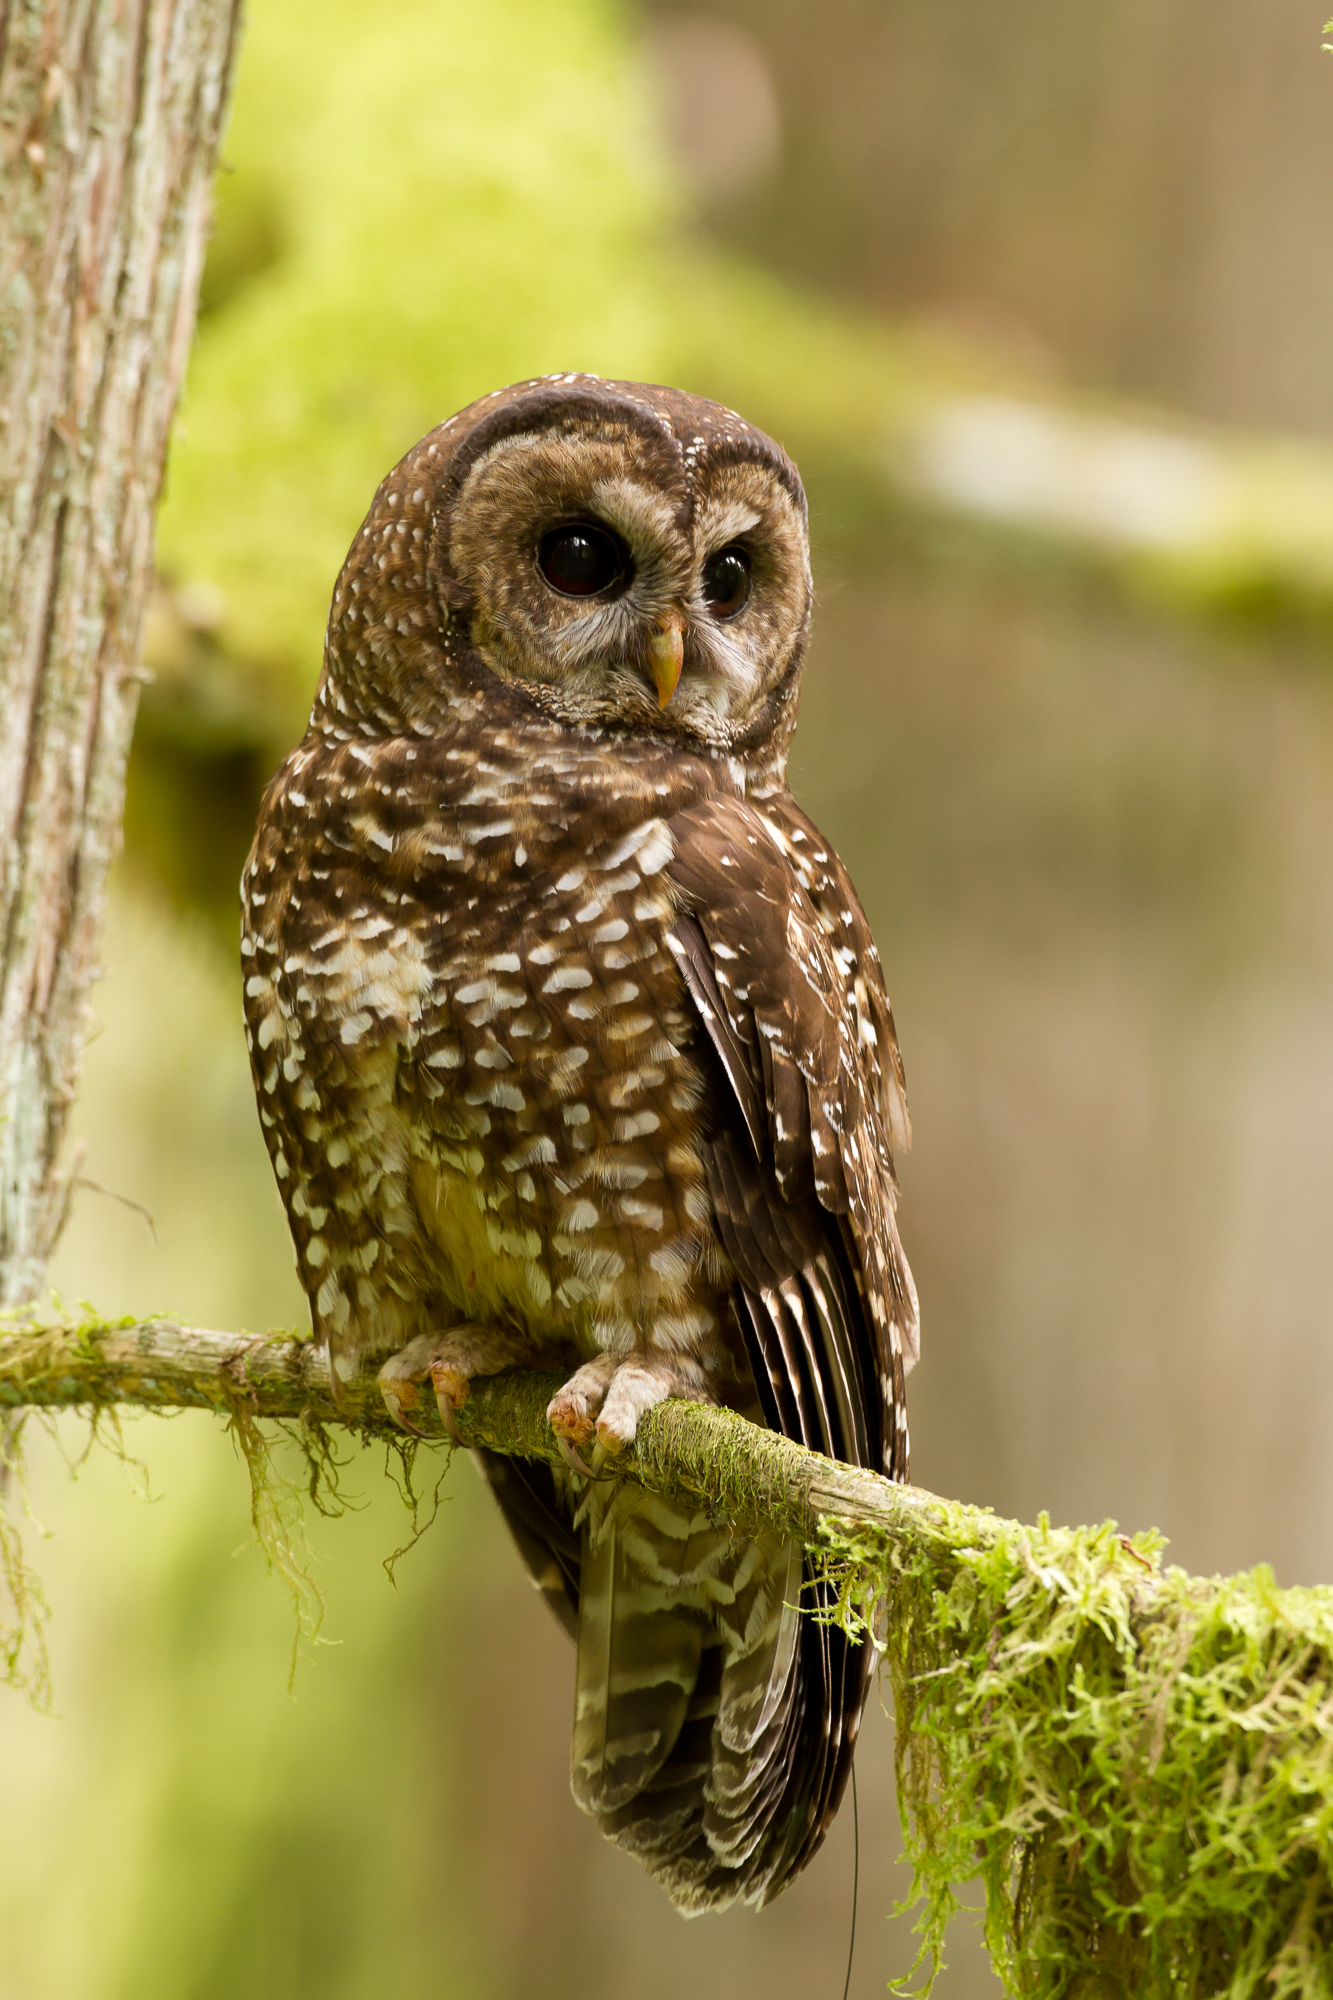 A juvenile spotted owl takes up temporary residence on its dispersal, Cayoosh Creek near Lillooet, B.C. Photo: Jared Hobbs